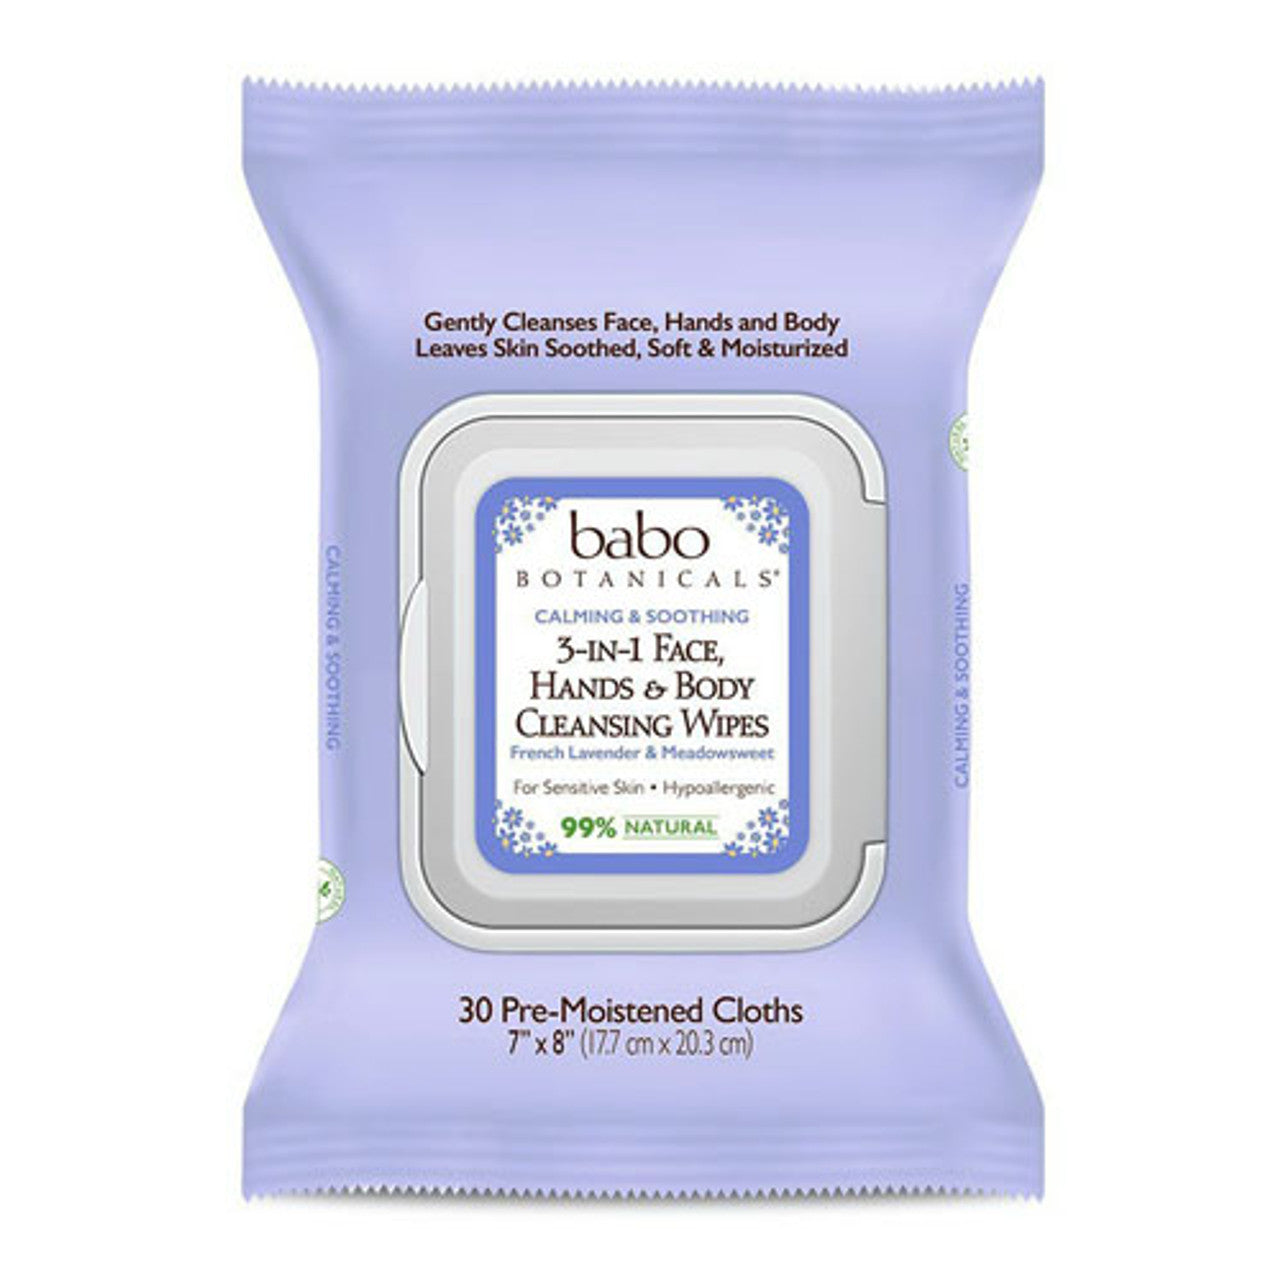 Babo Botanicals 3 In 1 Face, Hand And Body Cleansing Wipes, French Lavender, Meadowsweet, 30 Ea